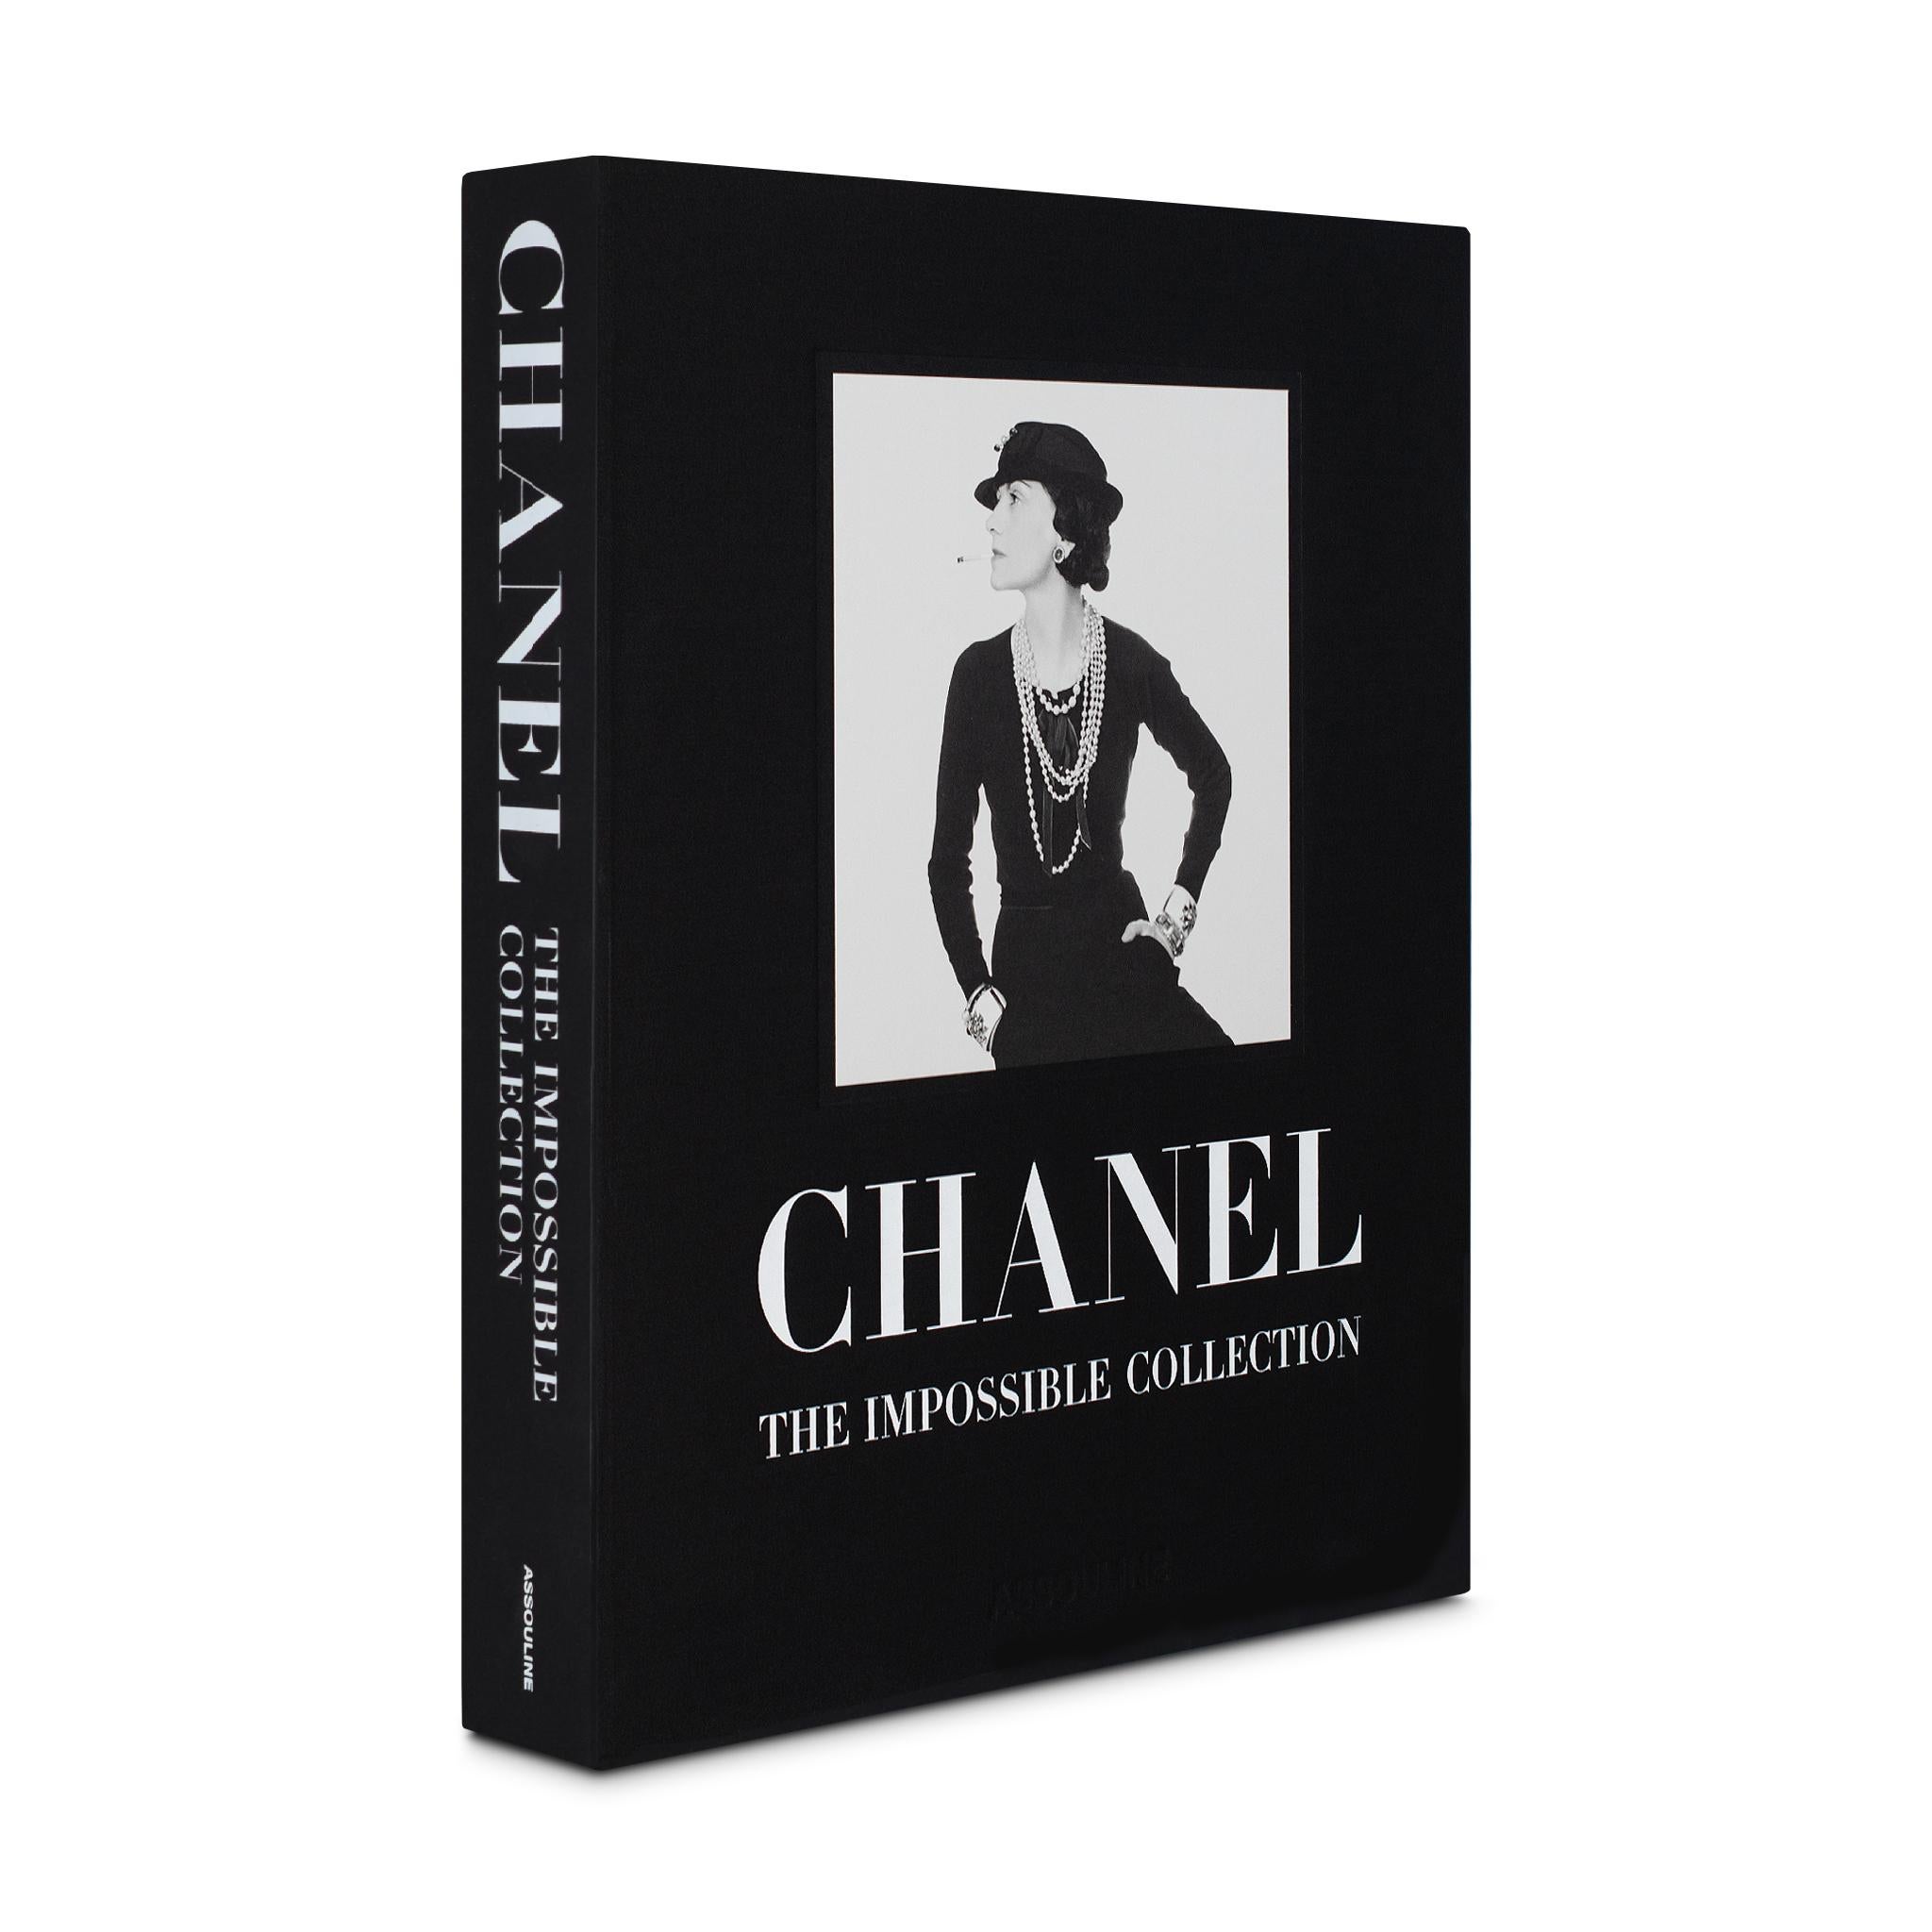 More than any other designer of her era, Gabrielle Chanel had the ability to predict the evolution of contemporary fashion. Self-inventor extraordinaire, Chanel revolutionized the lifestyle of her time by inventing a modern concept of luxe